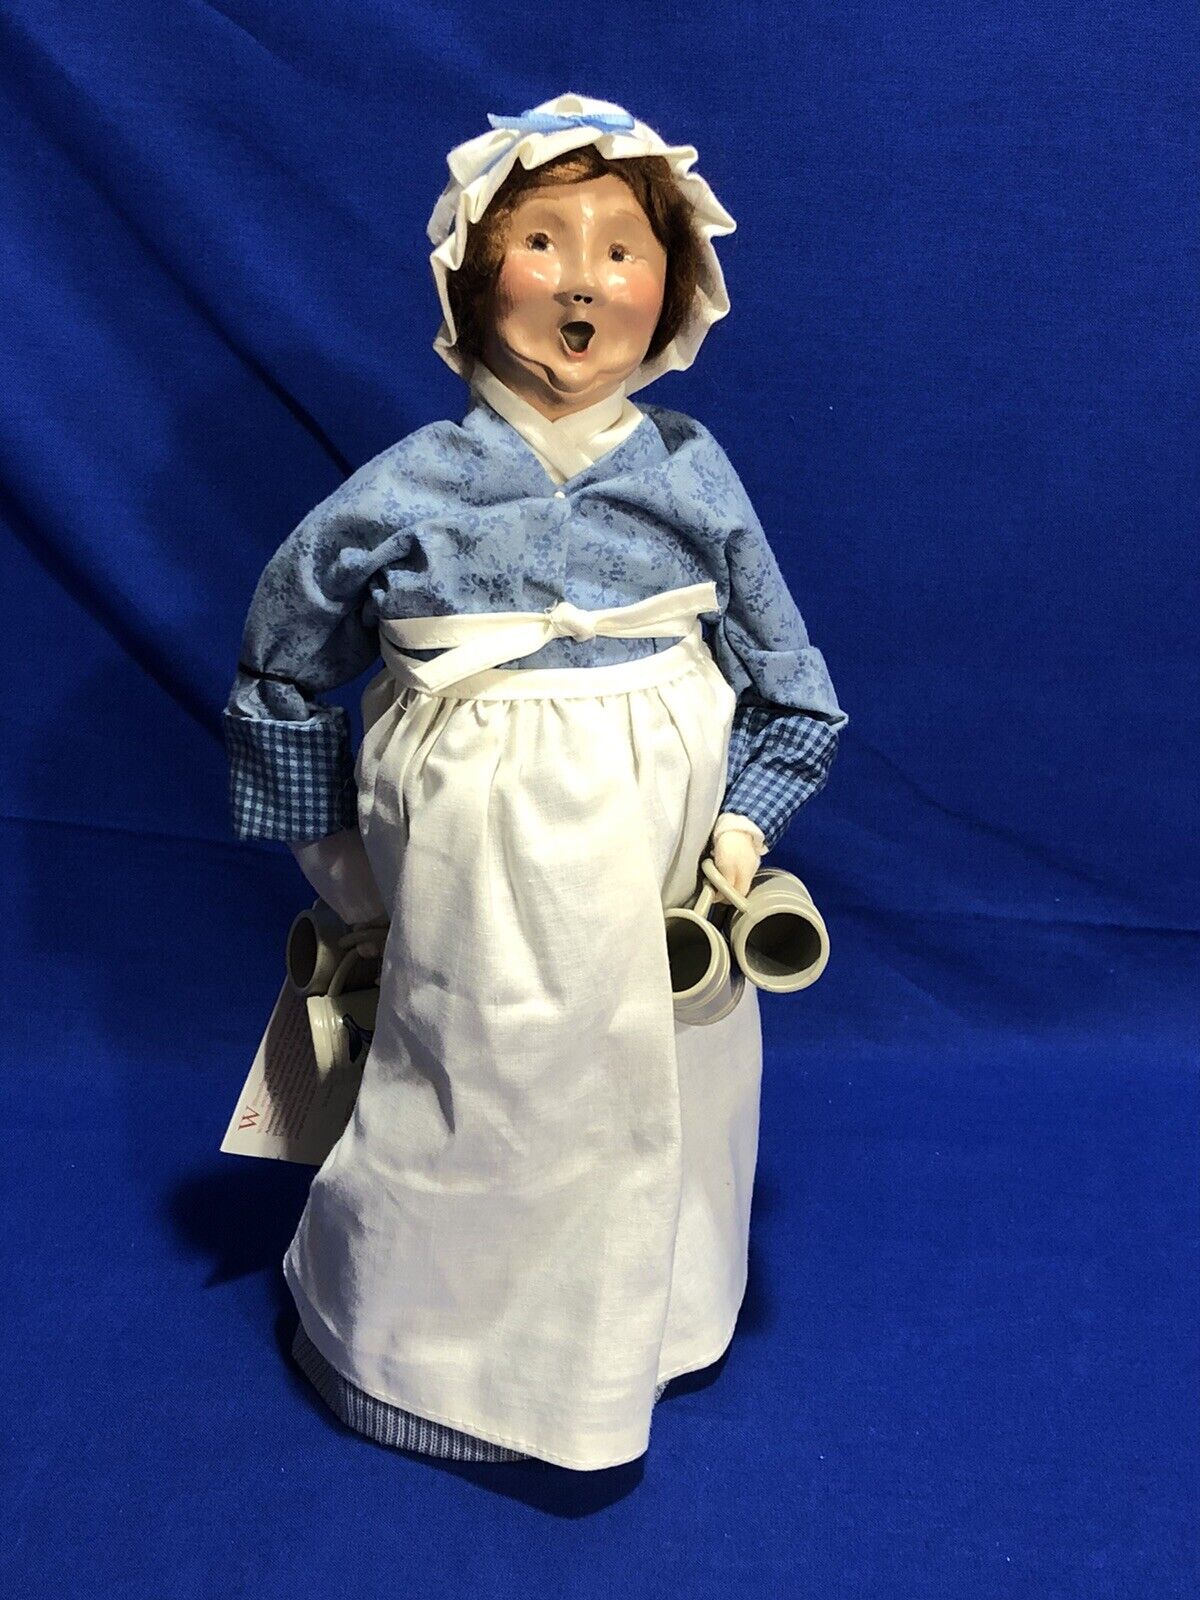 BYERS CHOICE VINTAGE CHRIS 2000 WILLIAMSBURG COLONIAL TAVERN WOMAN WITH MUGS